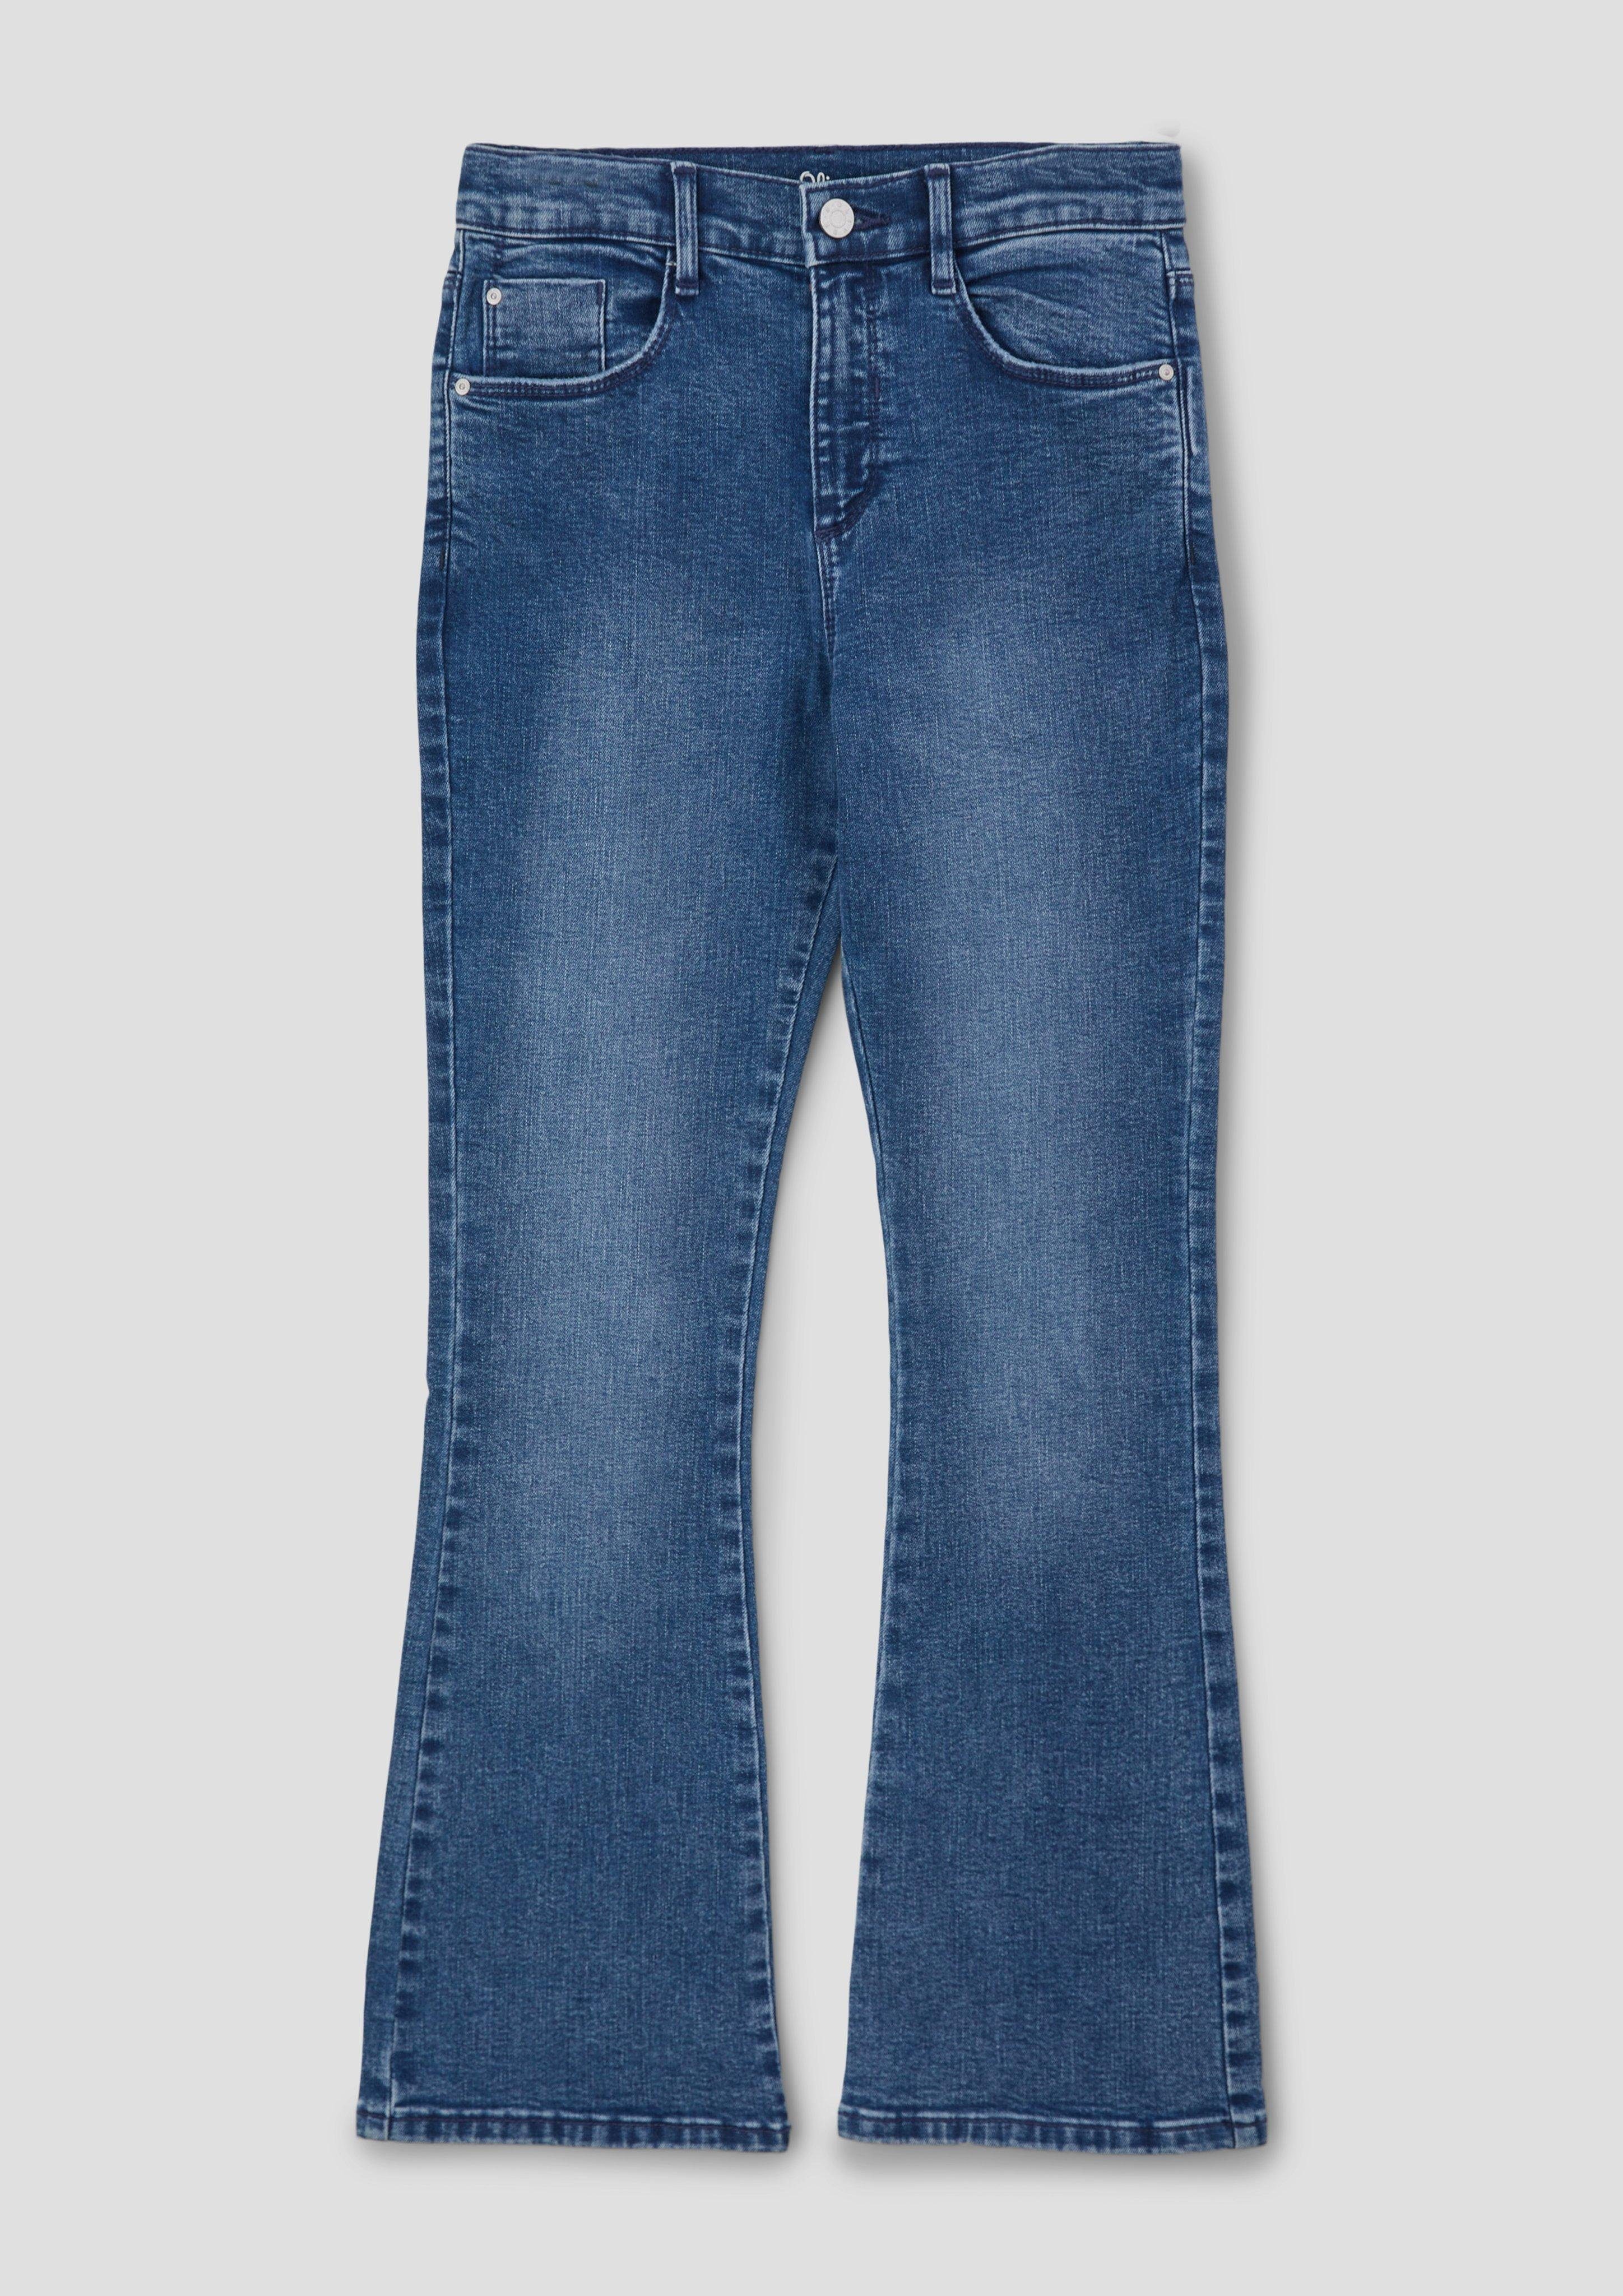 s.Oliver Junior s.Oliver Stoffhose Waschung, Teilungsnähte | Jeans